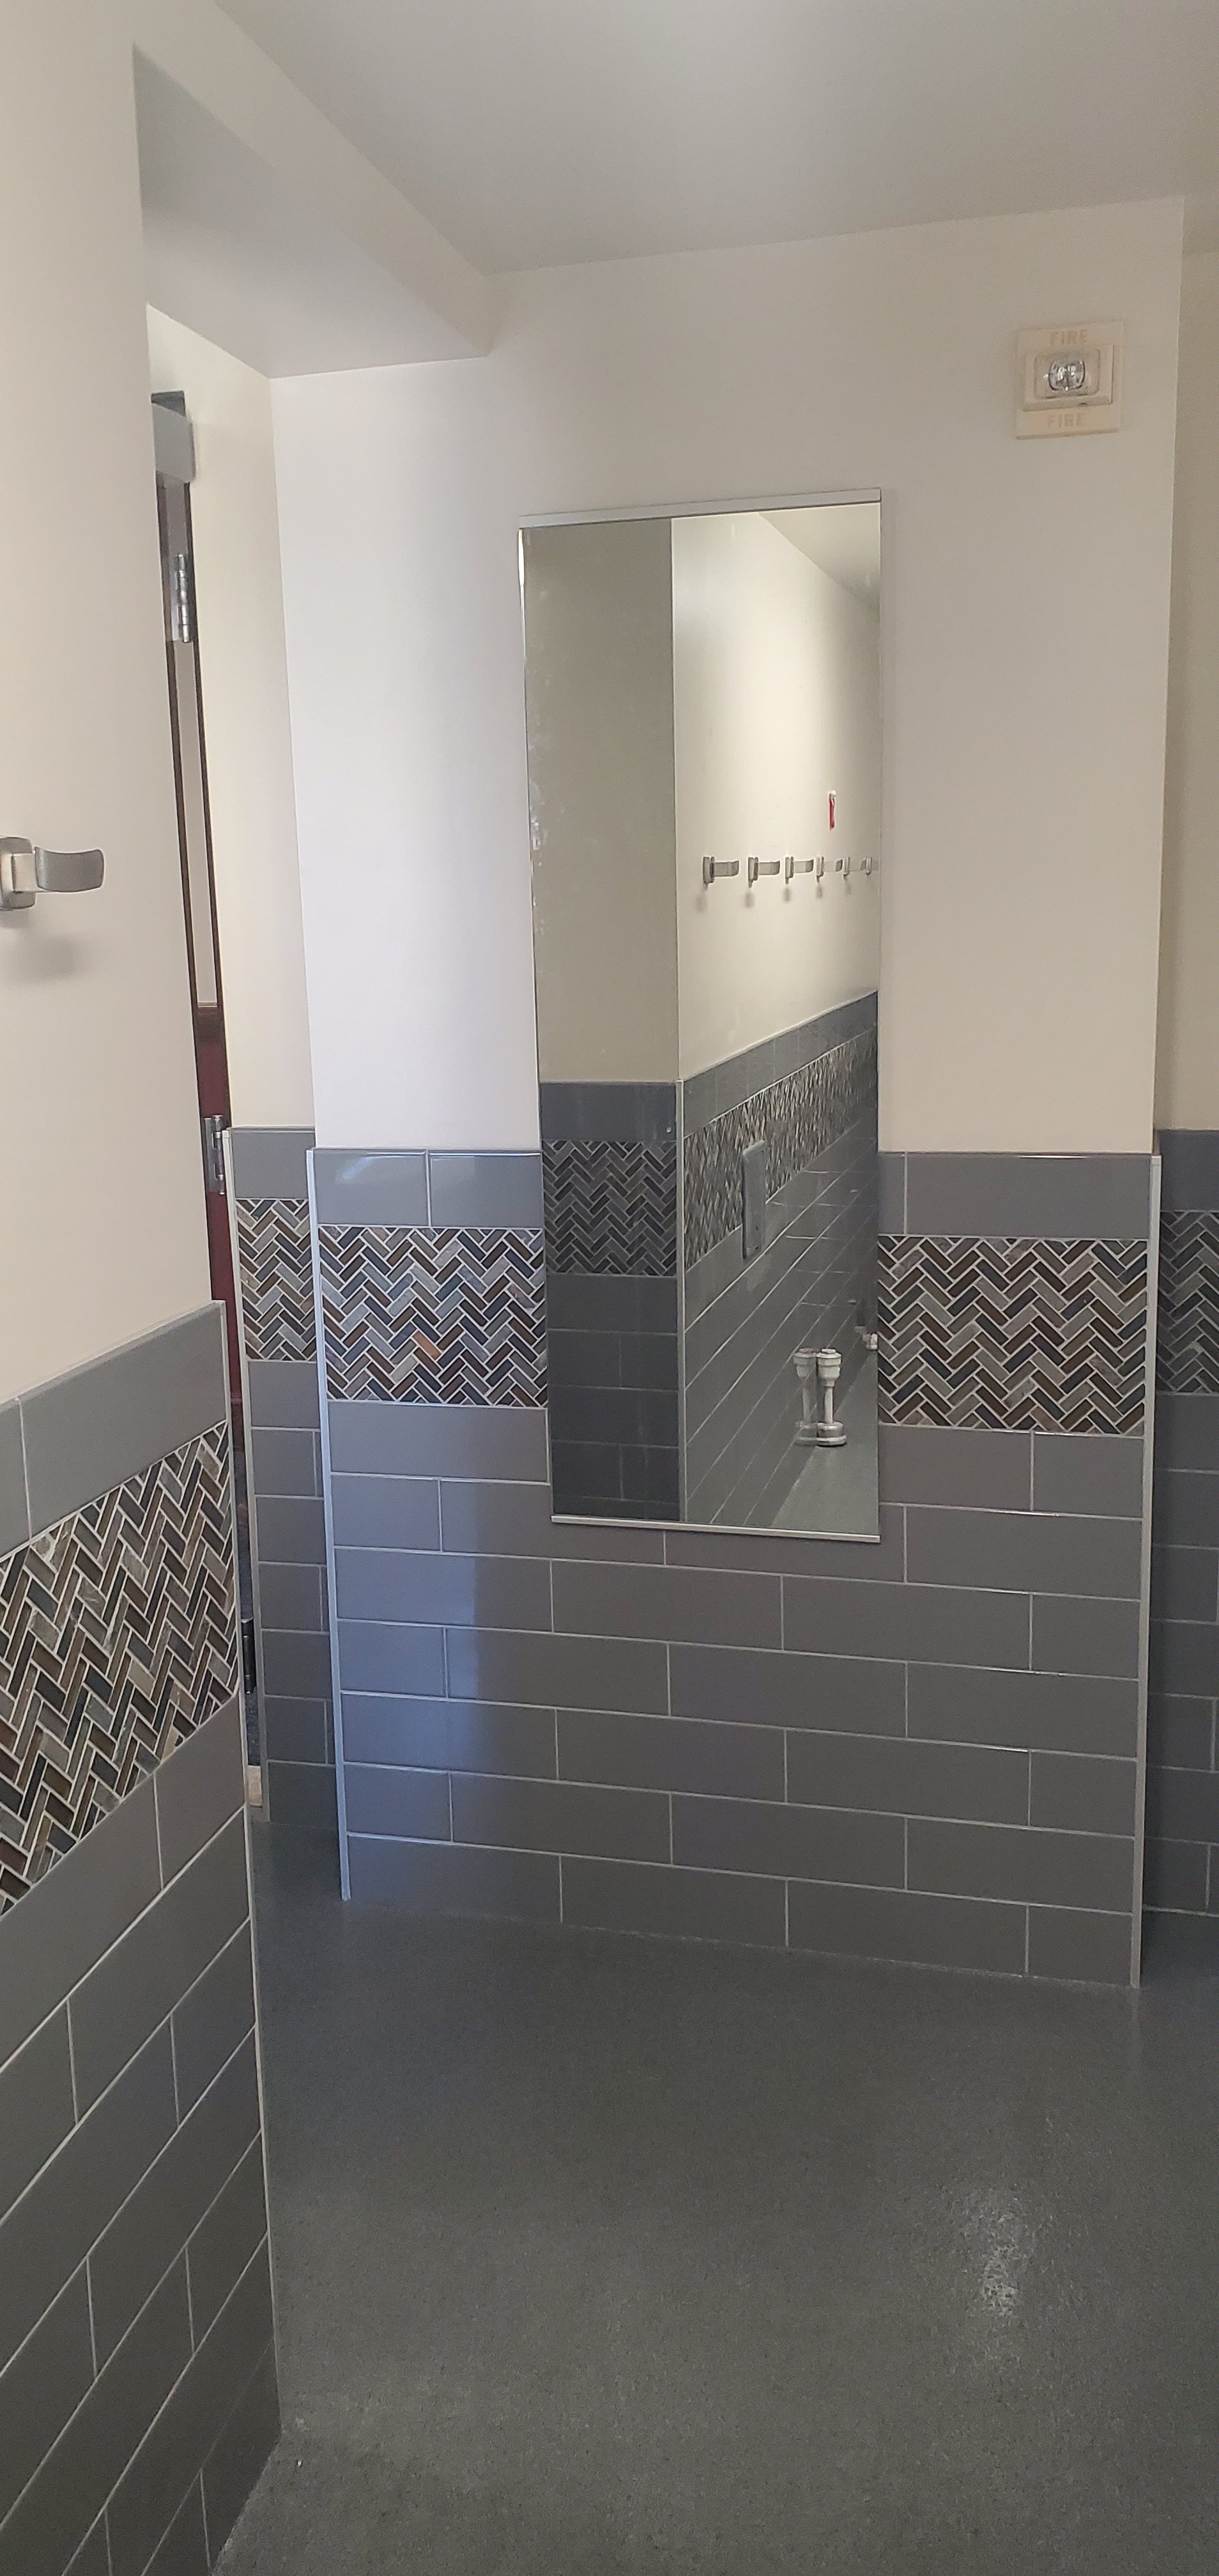 DHH Restroom Remodel Nearly Complete Mirrored Entry